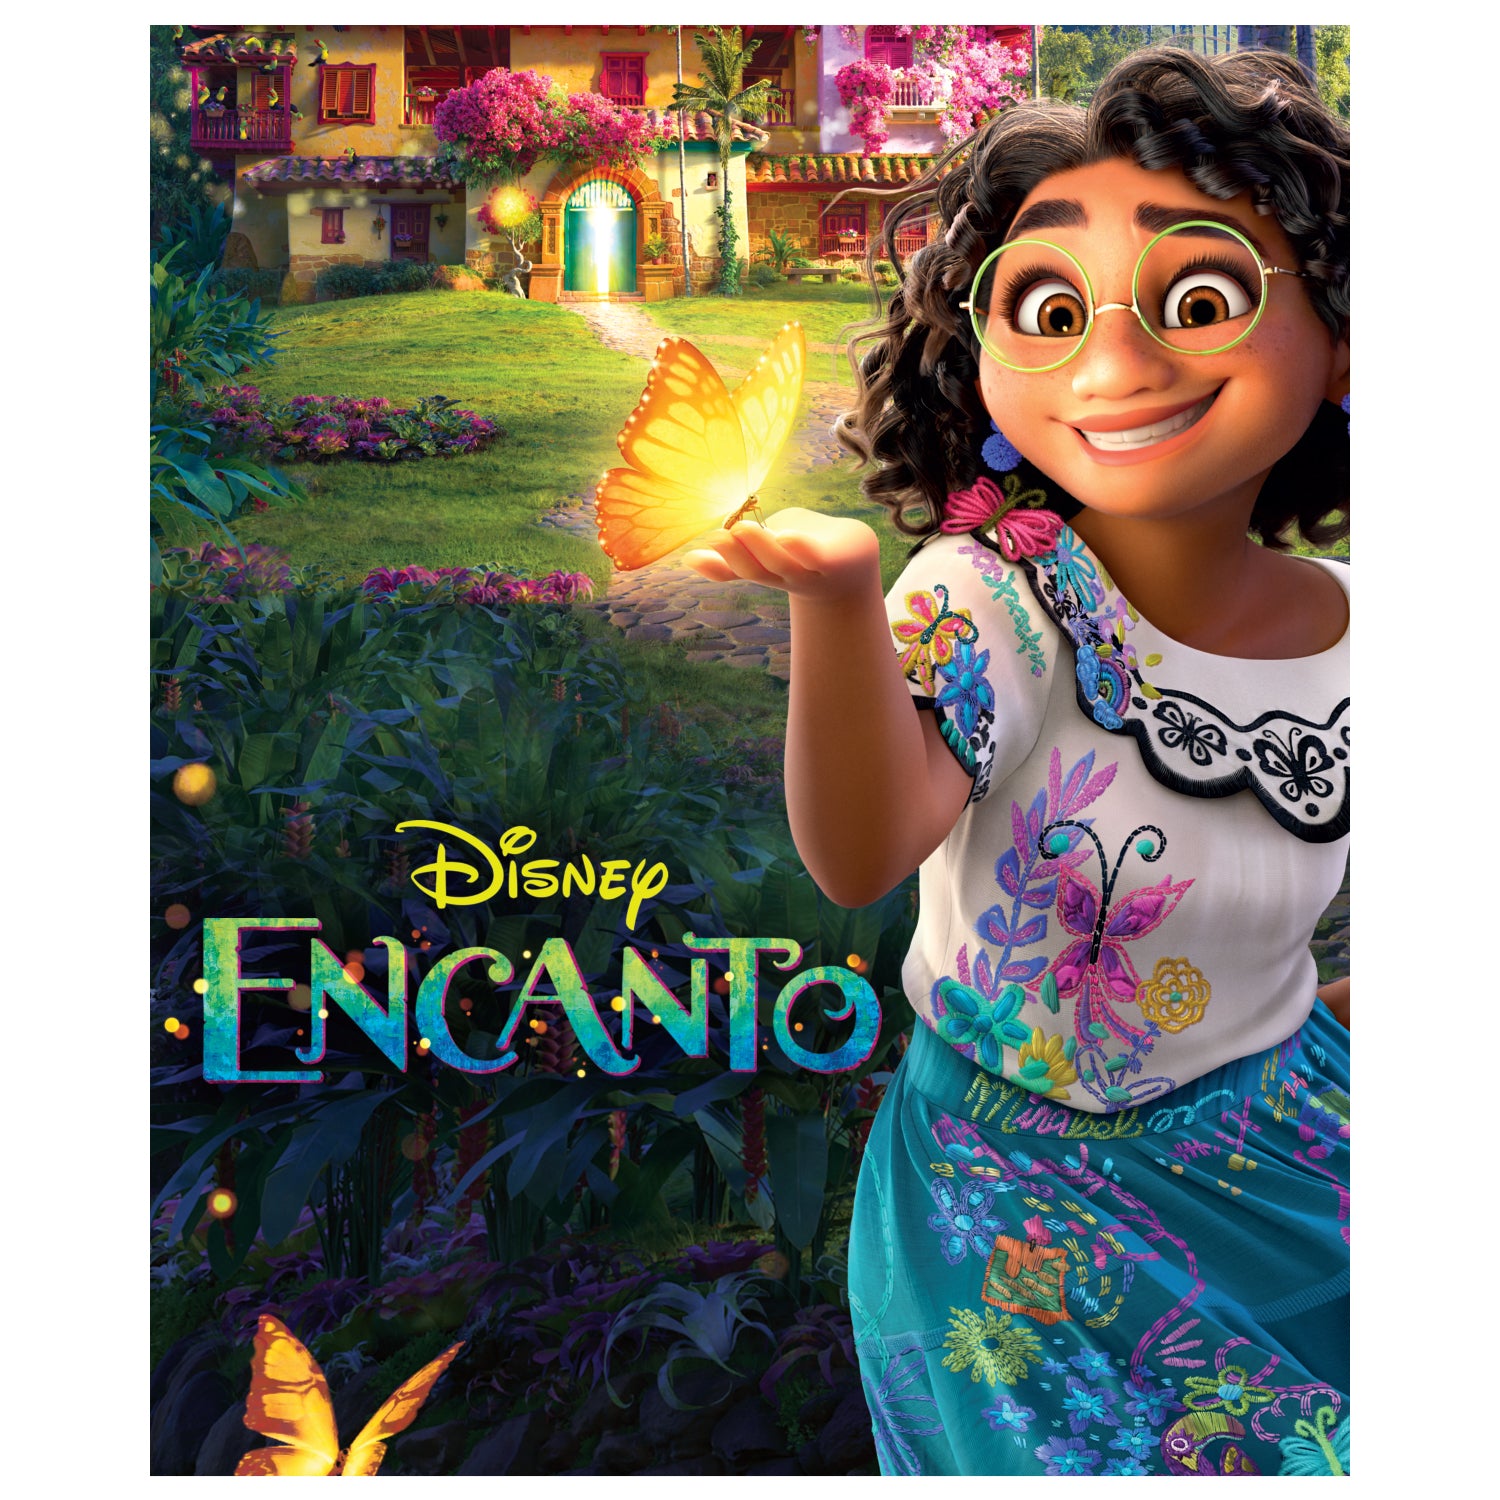 Encanto: Mirabel Movie Poster Poster - Officially Licensed Disney Remo